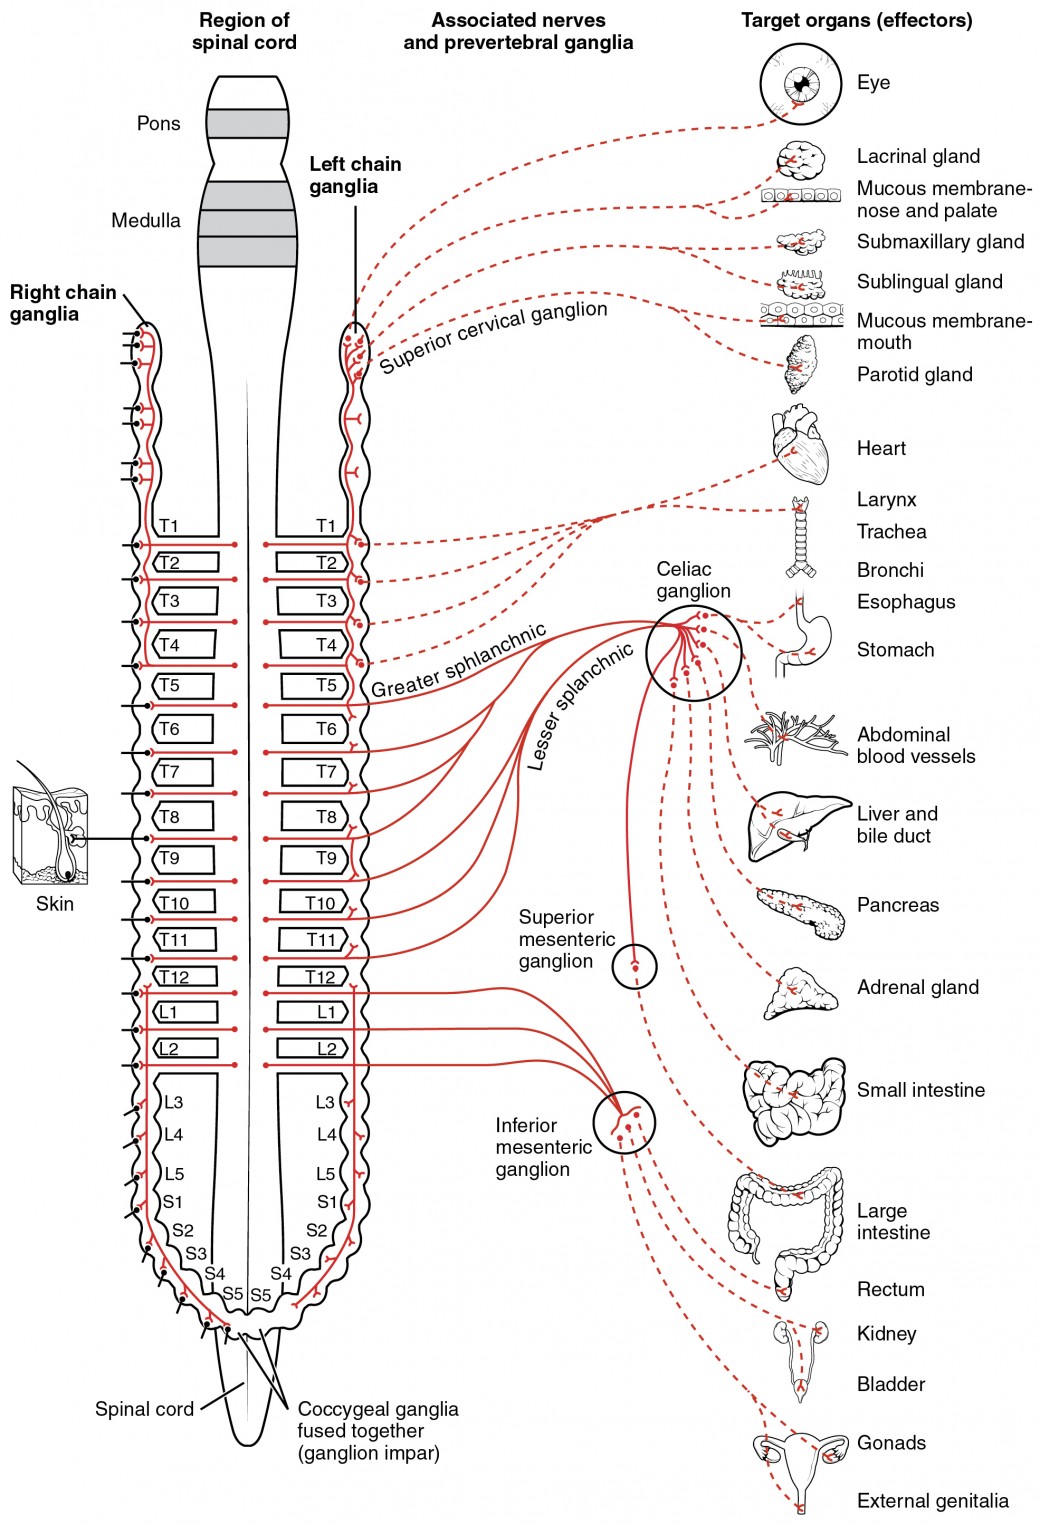 This diagram shows the spinal cord, and the connections from the spinal cord to the different target organs. The target organs are listed on the right.